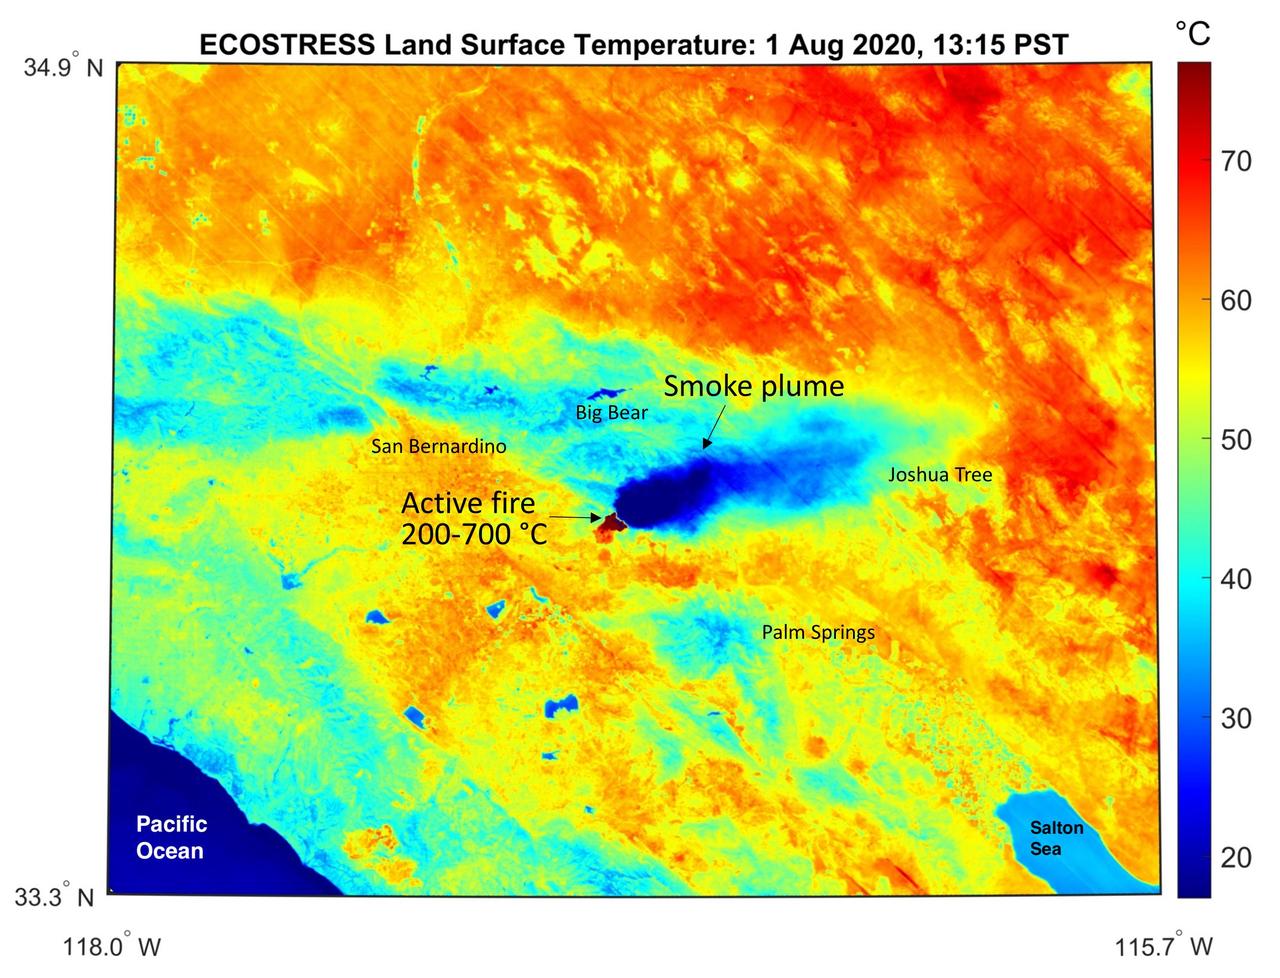 This temperature map shows the stressed and dry vegetation surrounding the Apple fire in Southern California on Aug. 1, 2020. The observation was made possible by NASA’s Ecosystem Spaceborne Thermal Radiometer Experiment on Space Station, or ECOSTRESS, that measured the temperature of the burn area and tracked the dark smoke plume drifting east from California to Arizona. Credits: NASA/JPL-Caltech